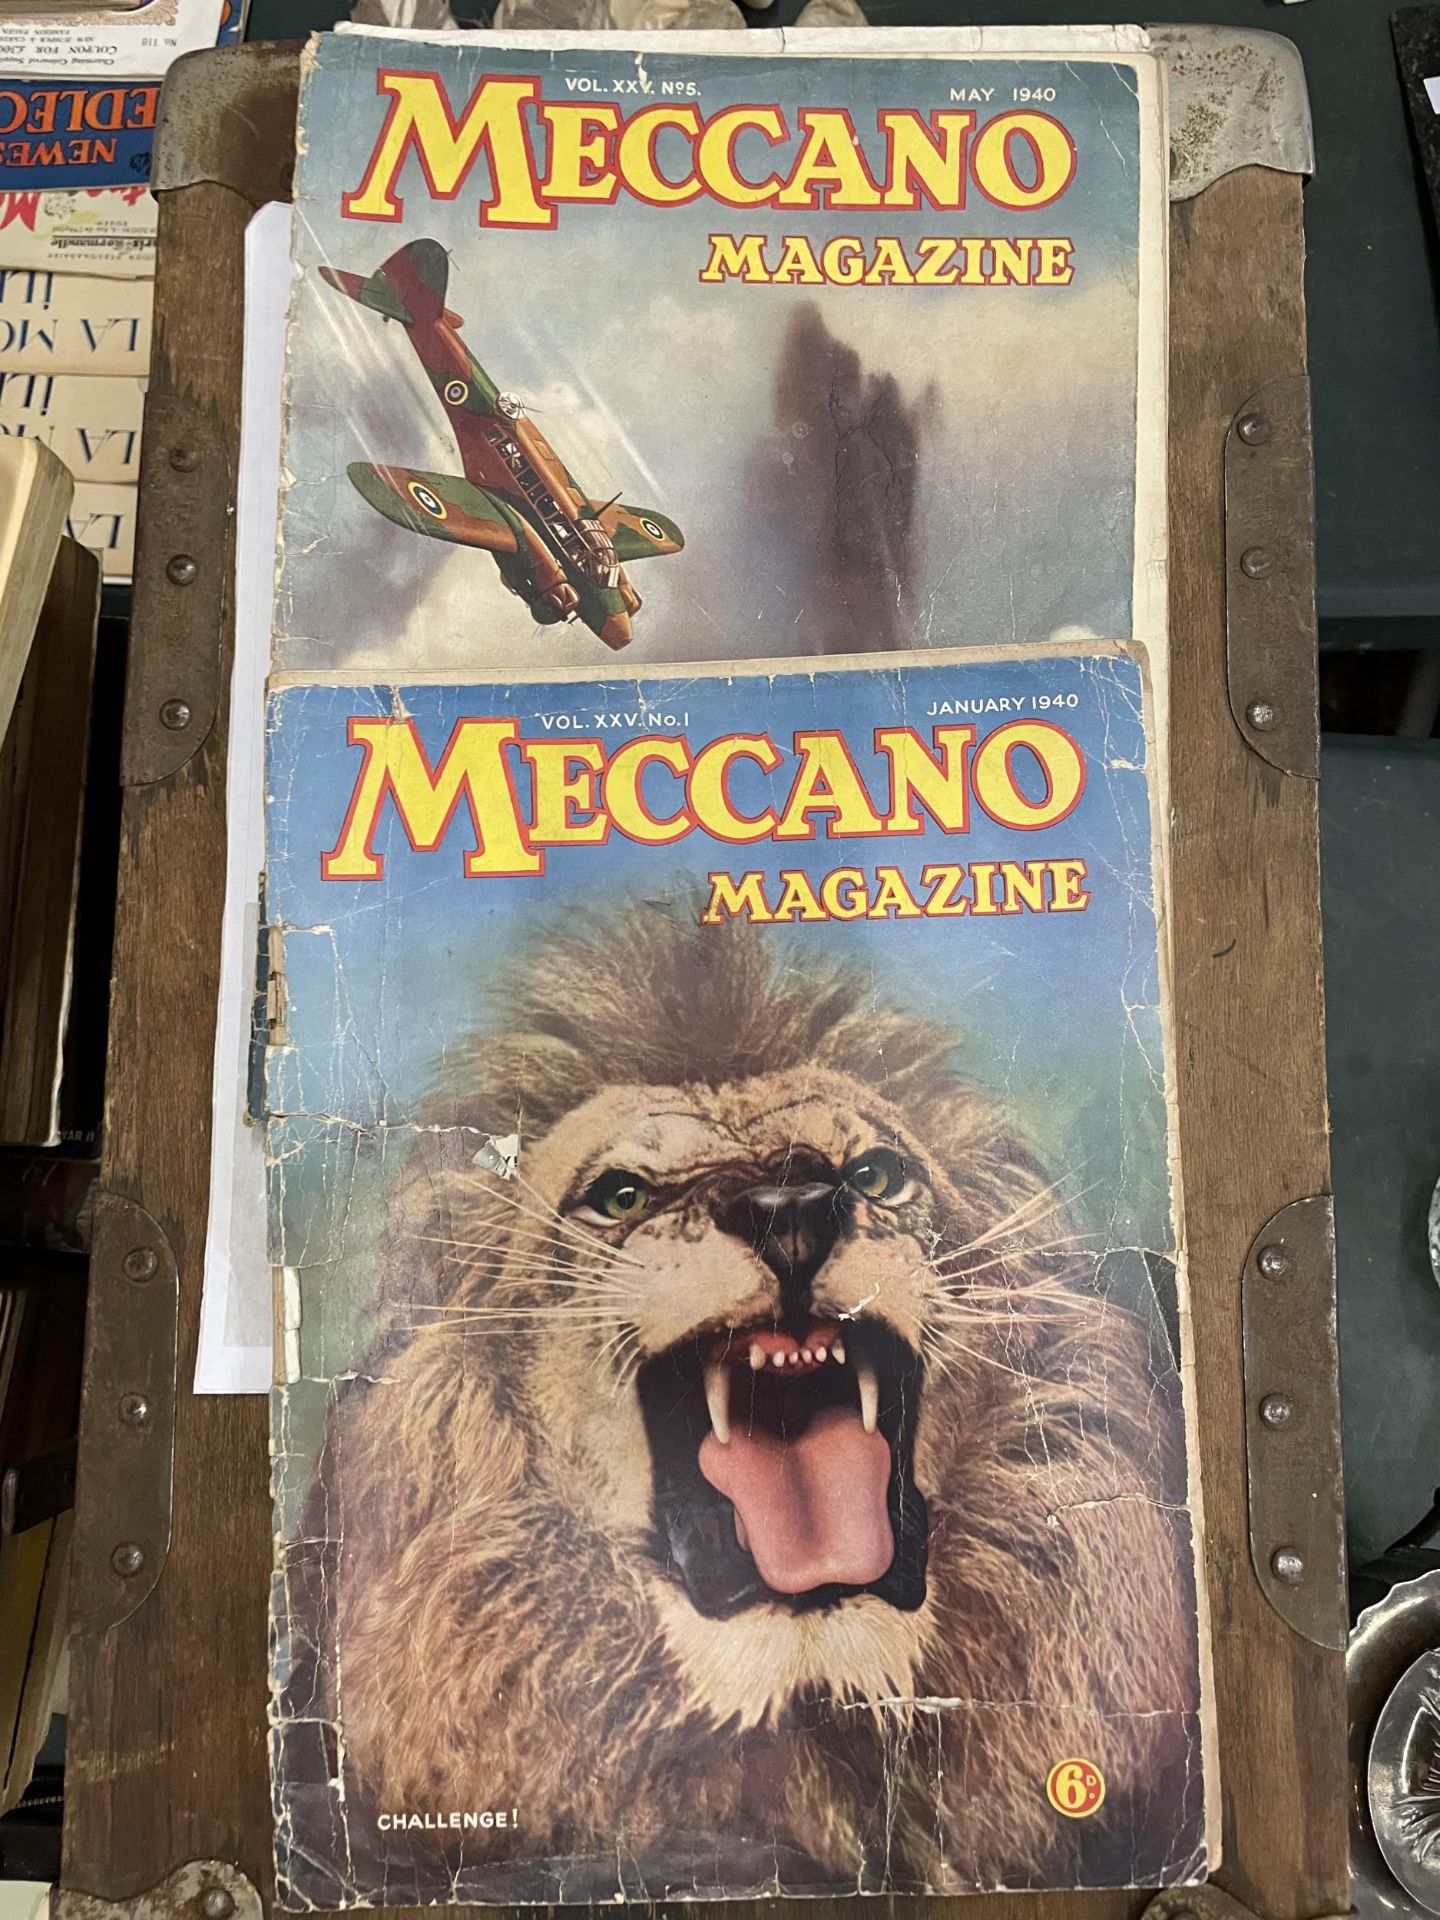 A VINTAGE MECCANO MAGAZINE FROM THE 1940'S